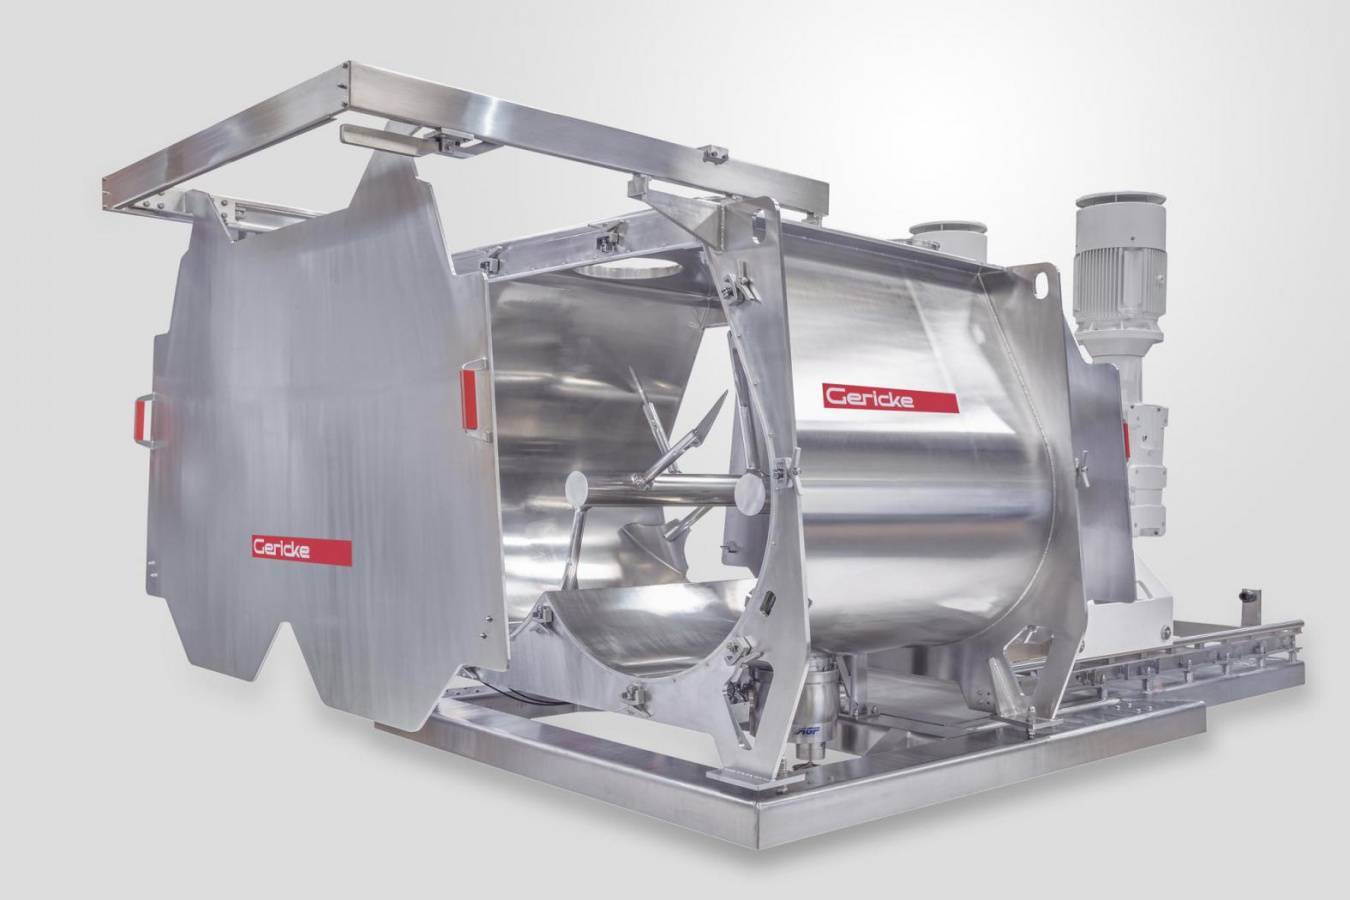 GERICKE GMS Batch Mixers: New sizes, new options GERICKE is a pioneer in the designing powder mixers for demanding applications. 